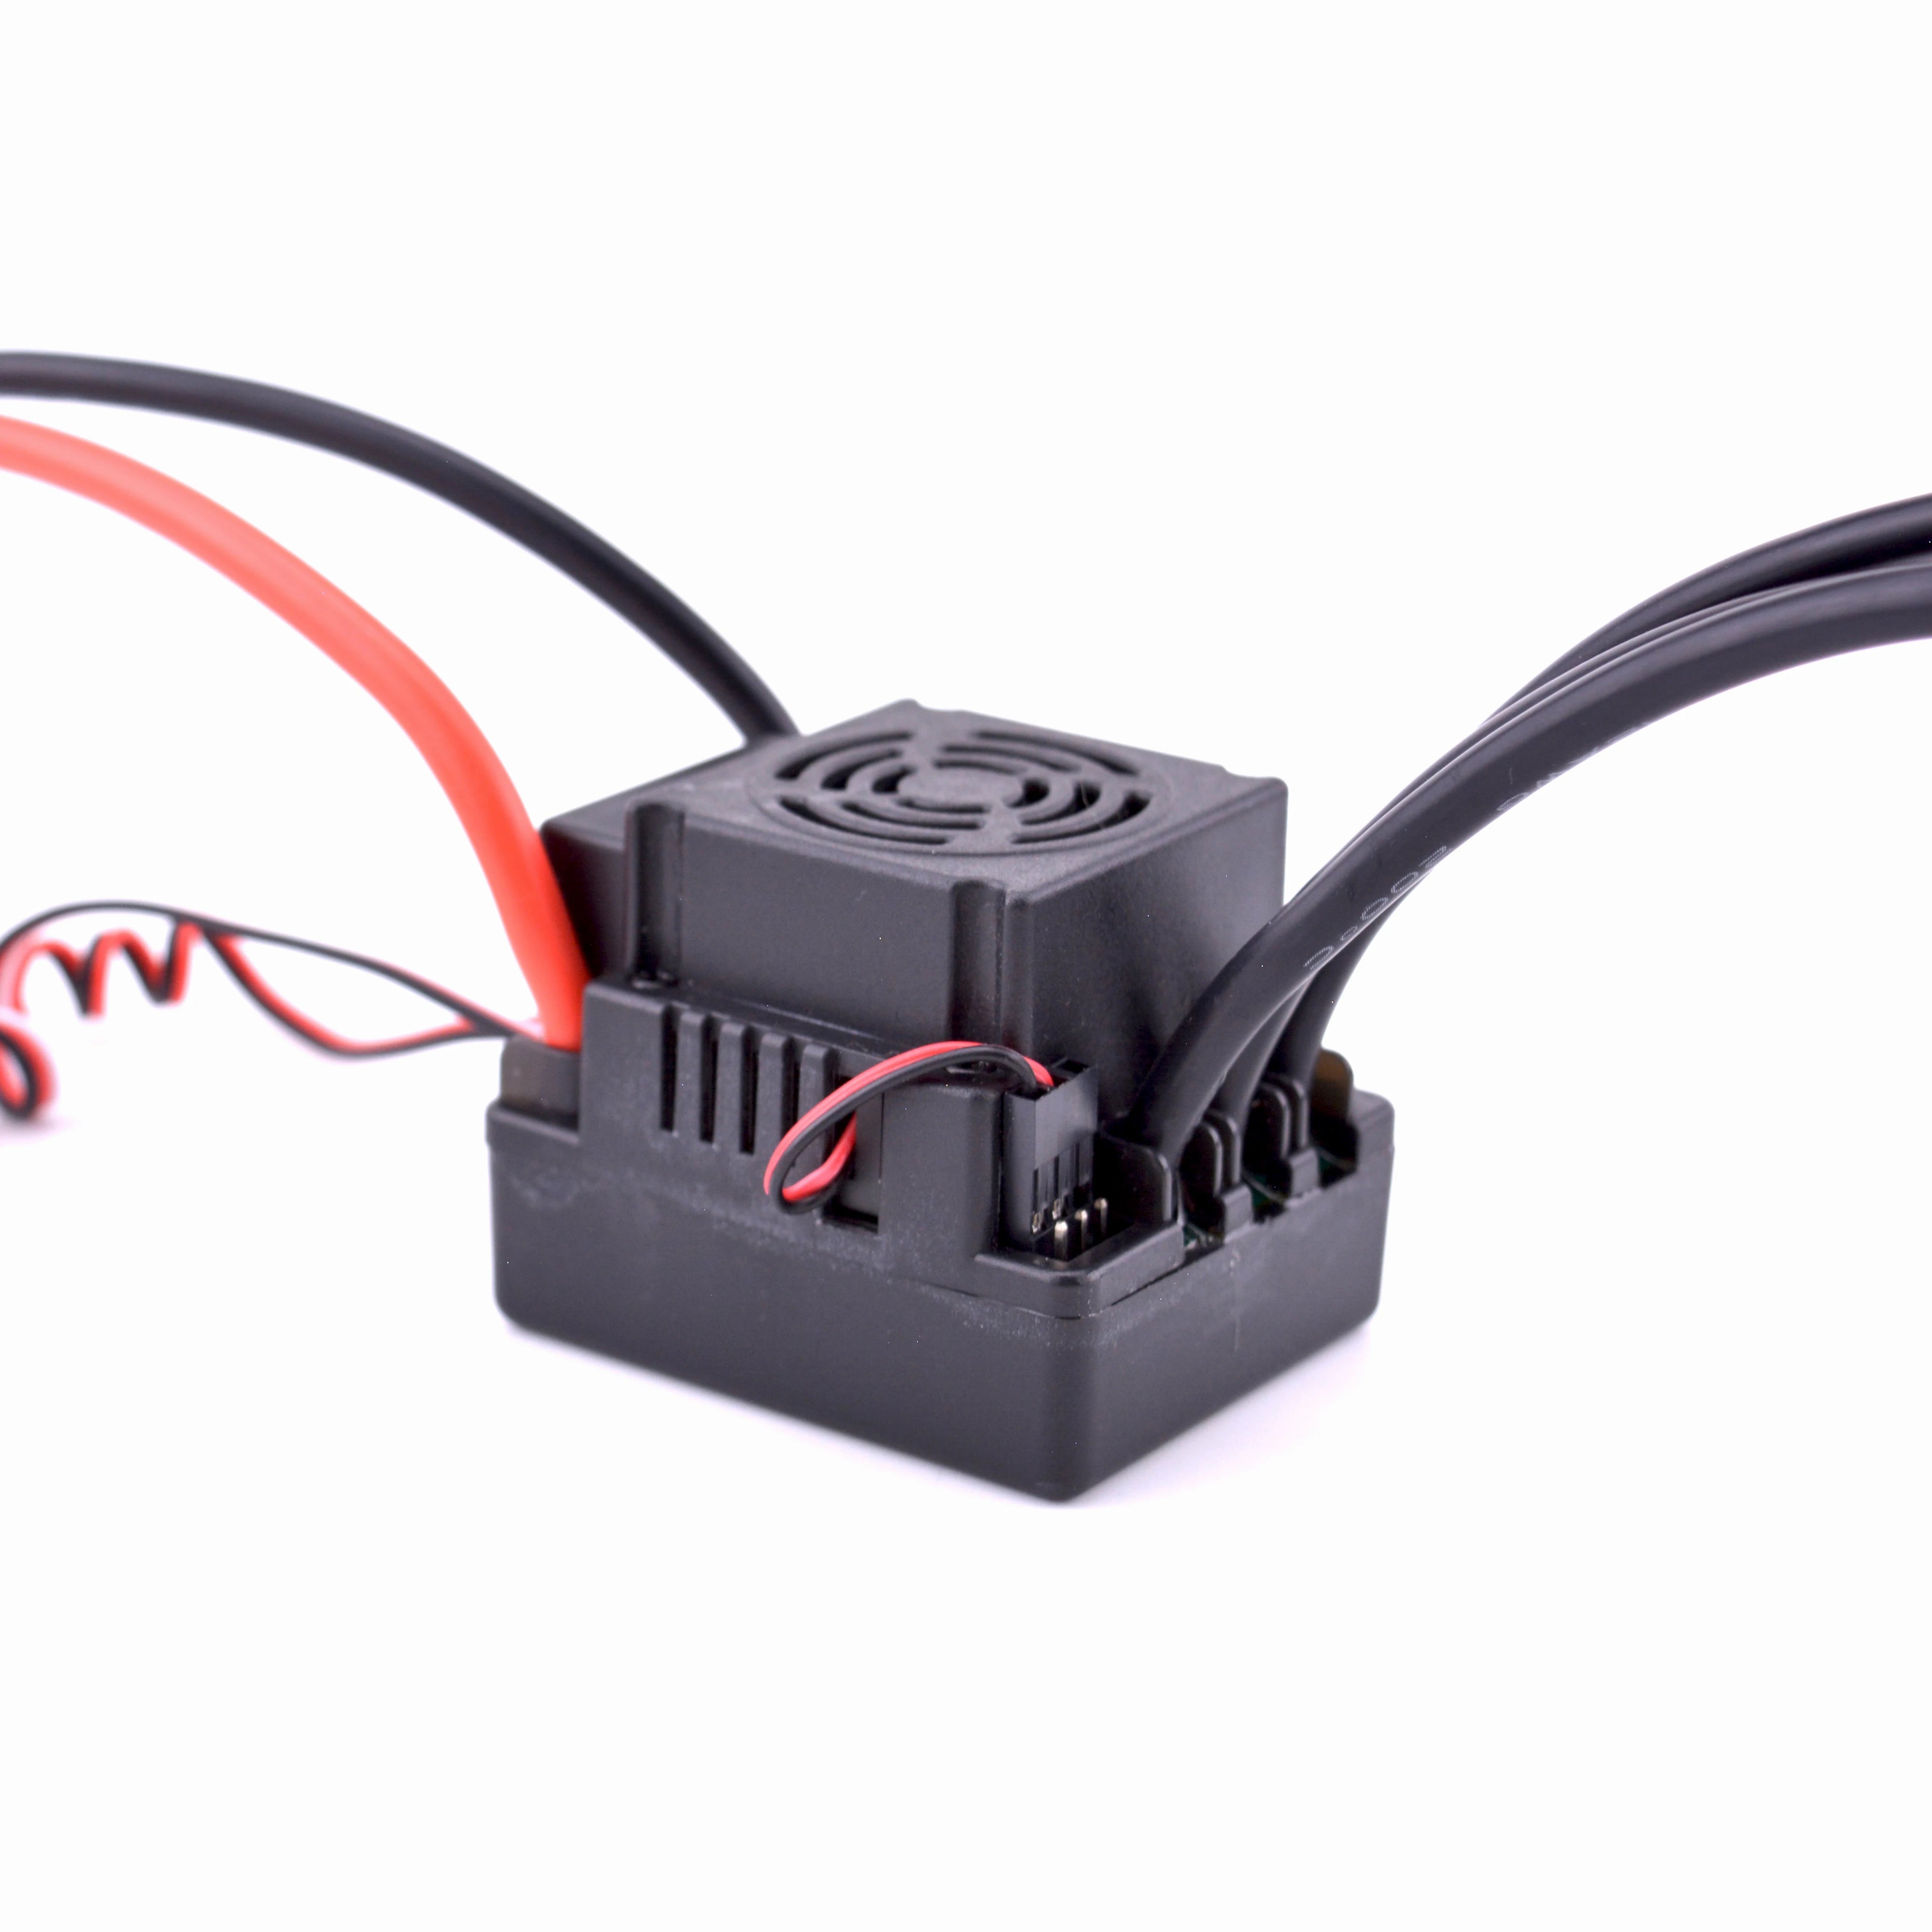 the 120A brushless ESC is built with the highest quality components to ensure high efficiency operation